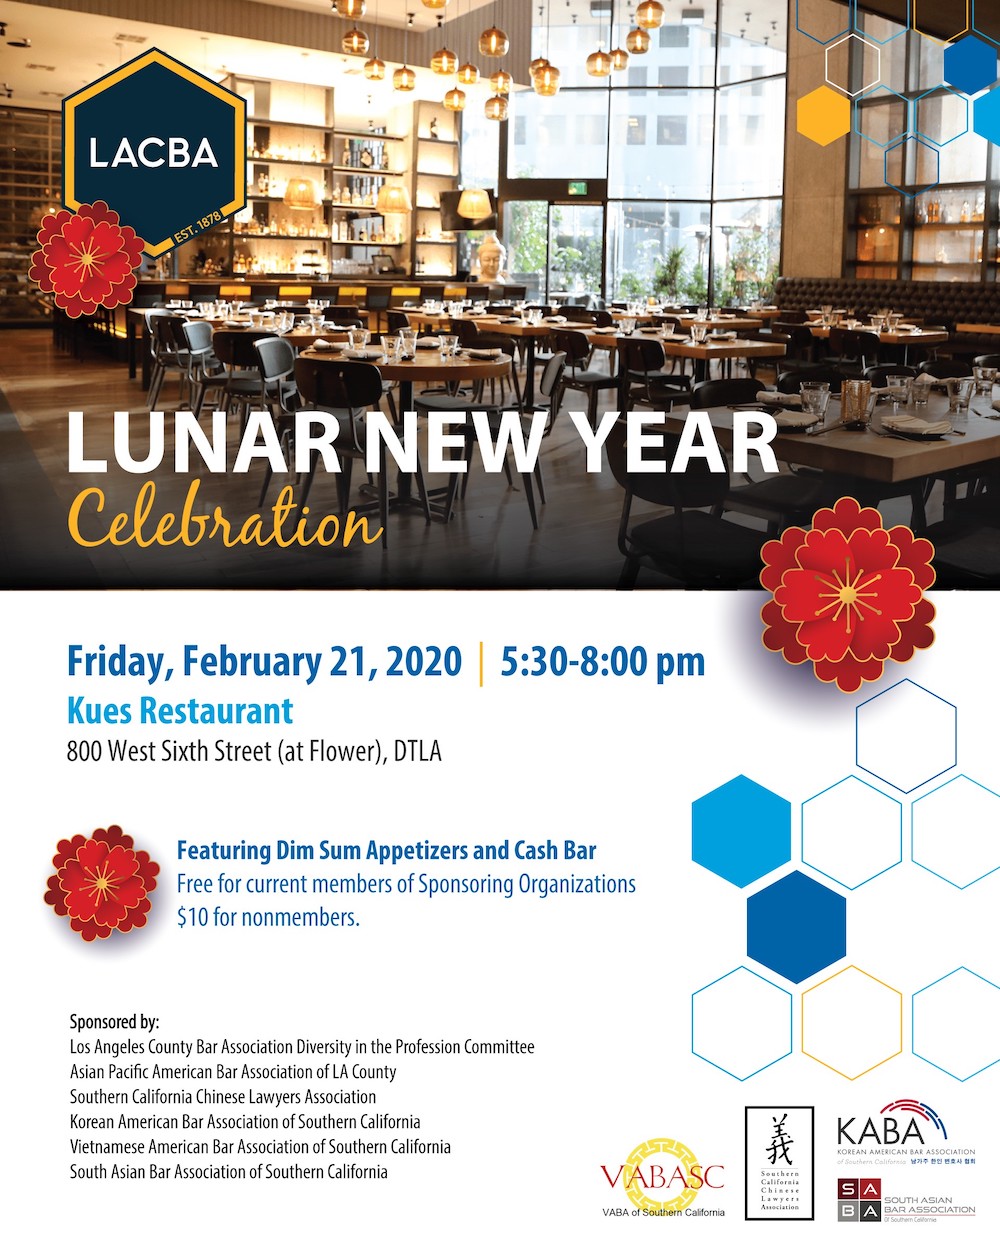 SABA-SC is co-sponsoring a Lunar New Year Celebration on February 21 from 5:30 to 8:00 p.m. at Kues Restaurant, 800 West Sixth Street (at Flower), DTLA.